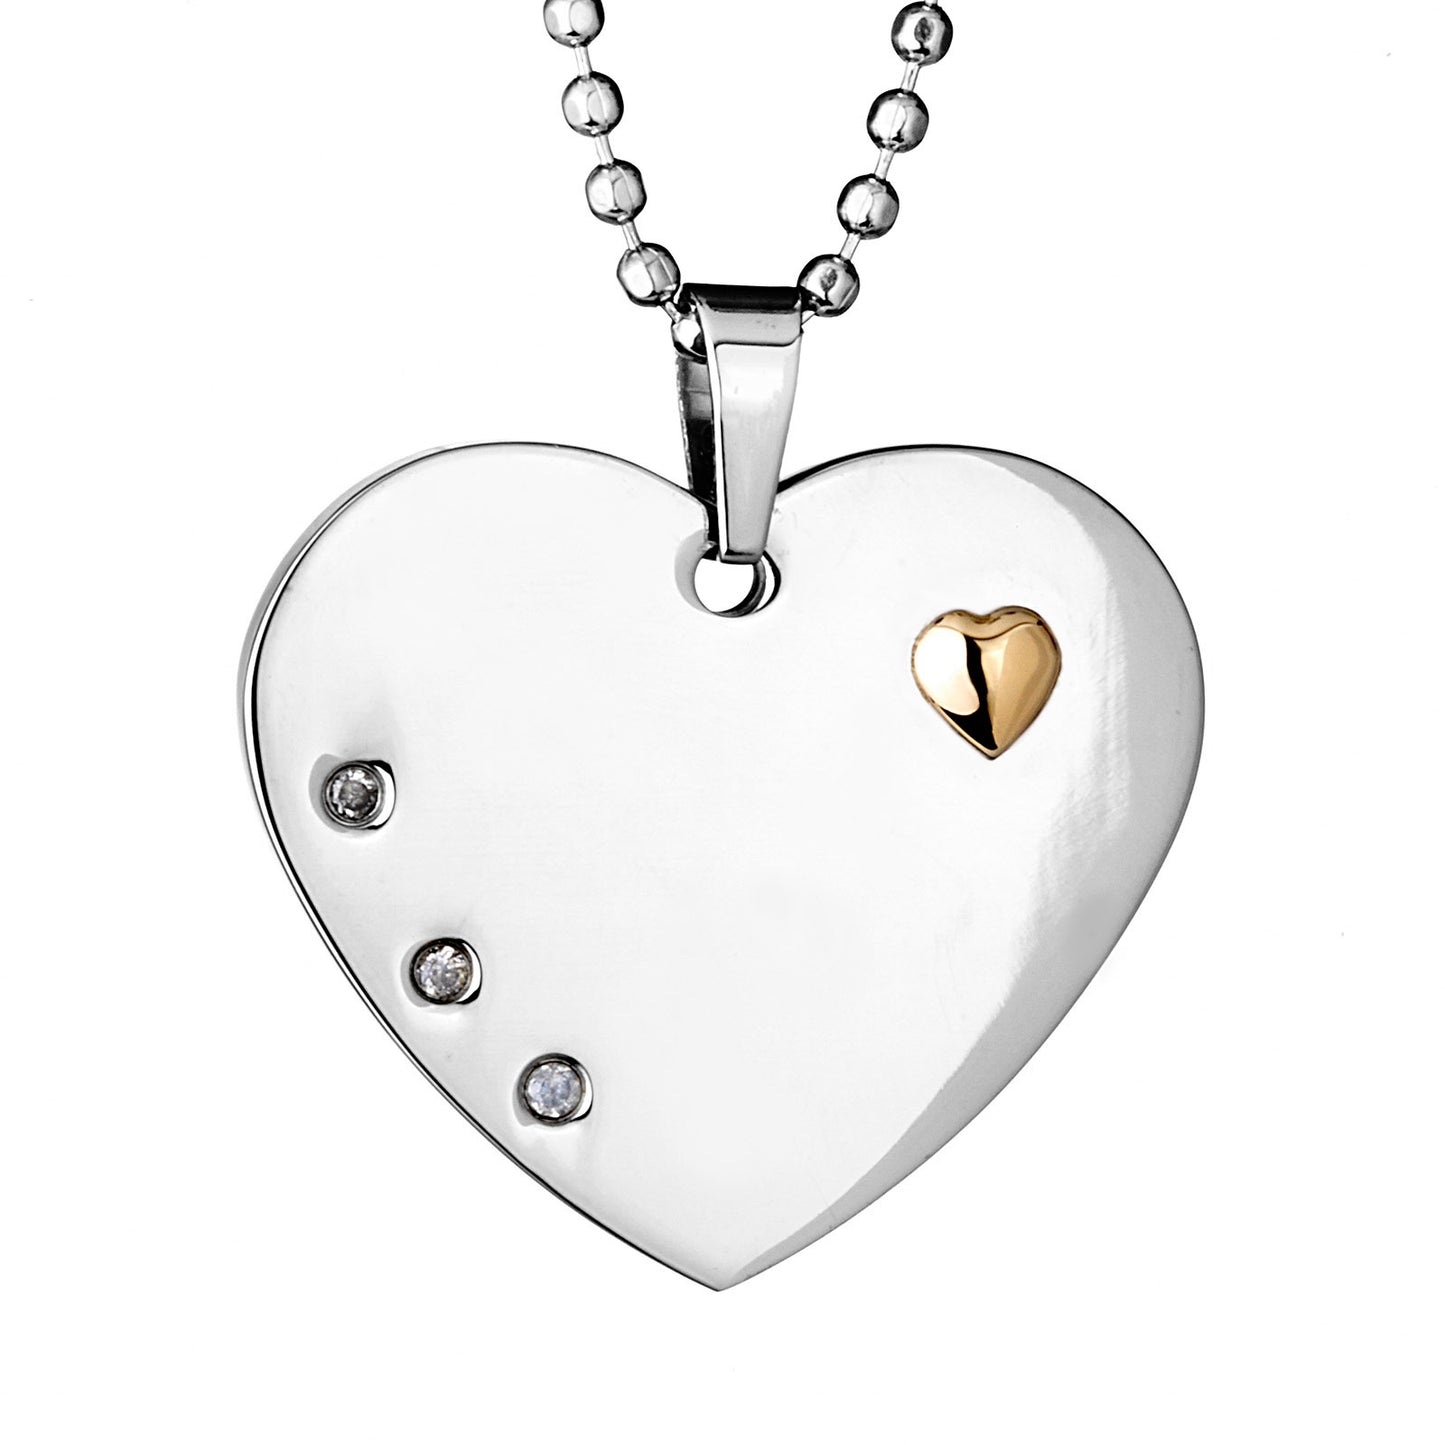 ELYA Gold Heart with 3 CZs Heart Stainless Steel Pendant Necklace - 24"